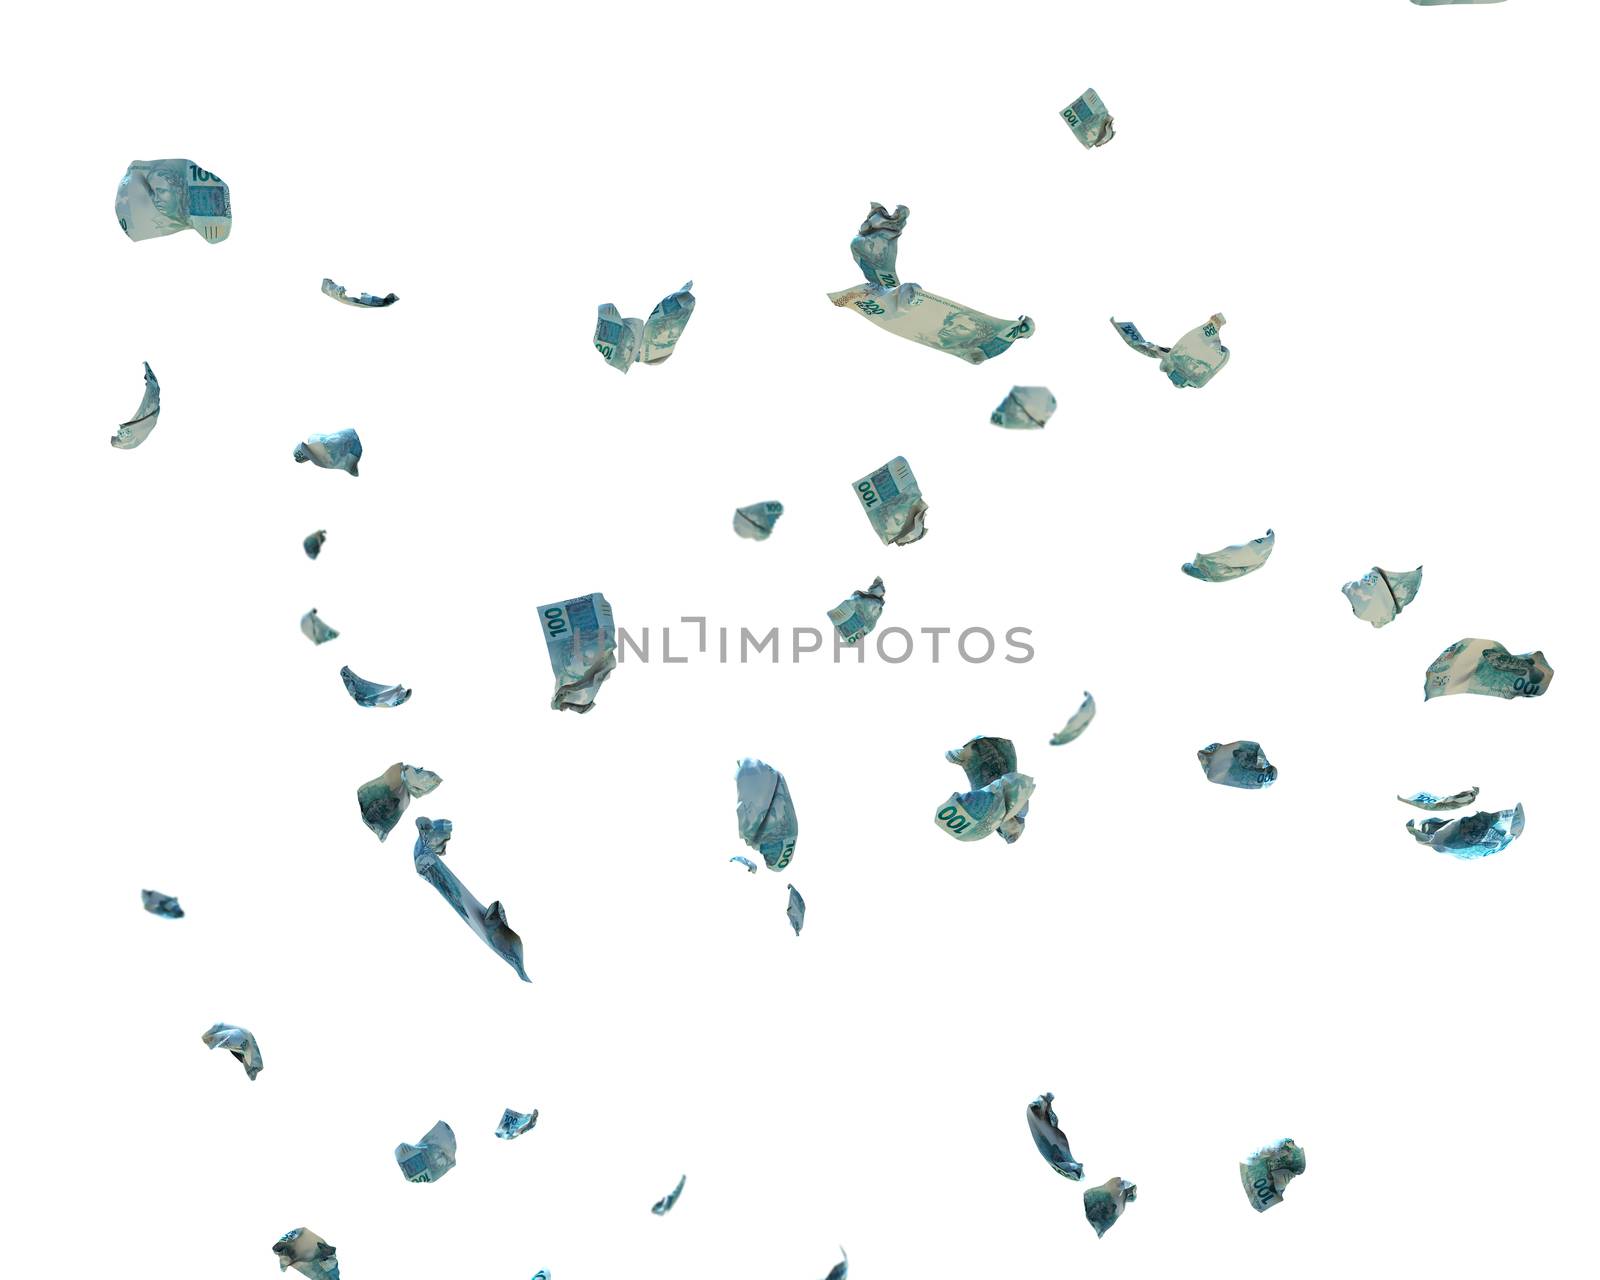 100 Brazil Reais Currency Crumpled Banknotes flying, against whi by pixelfootage